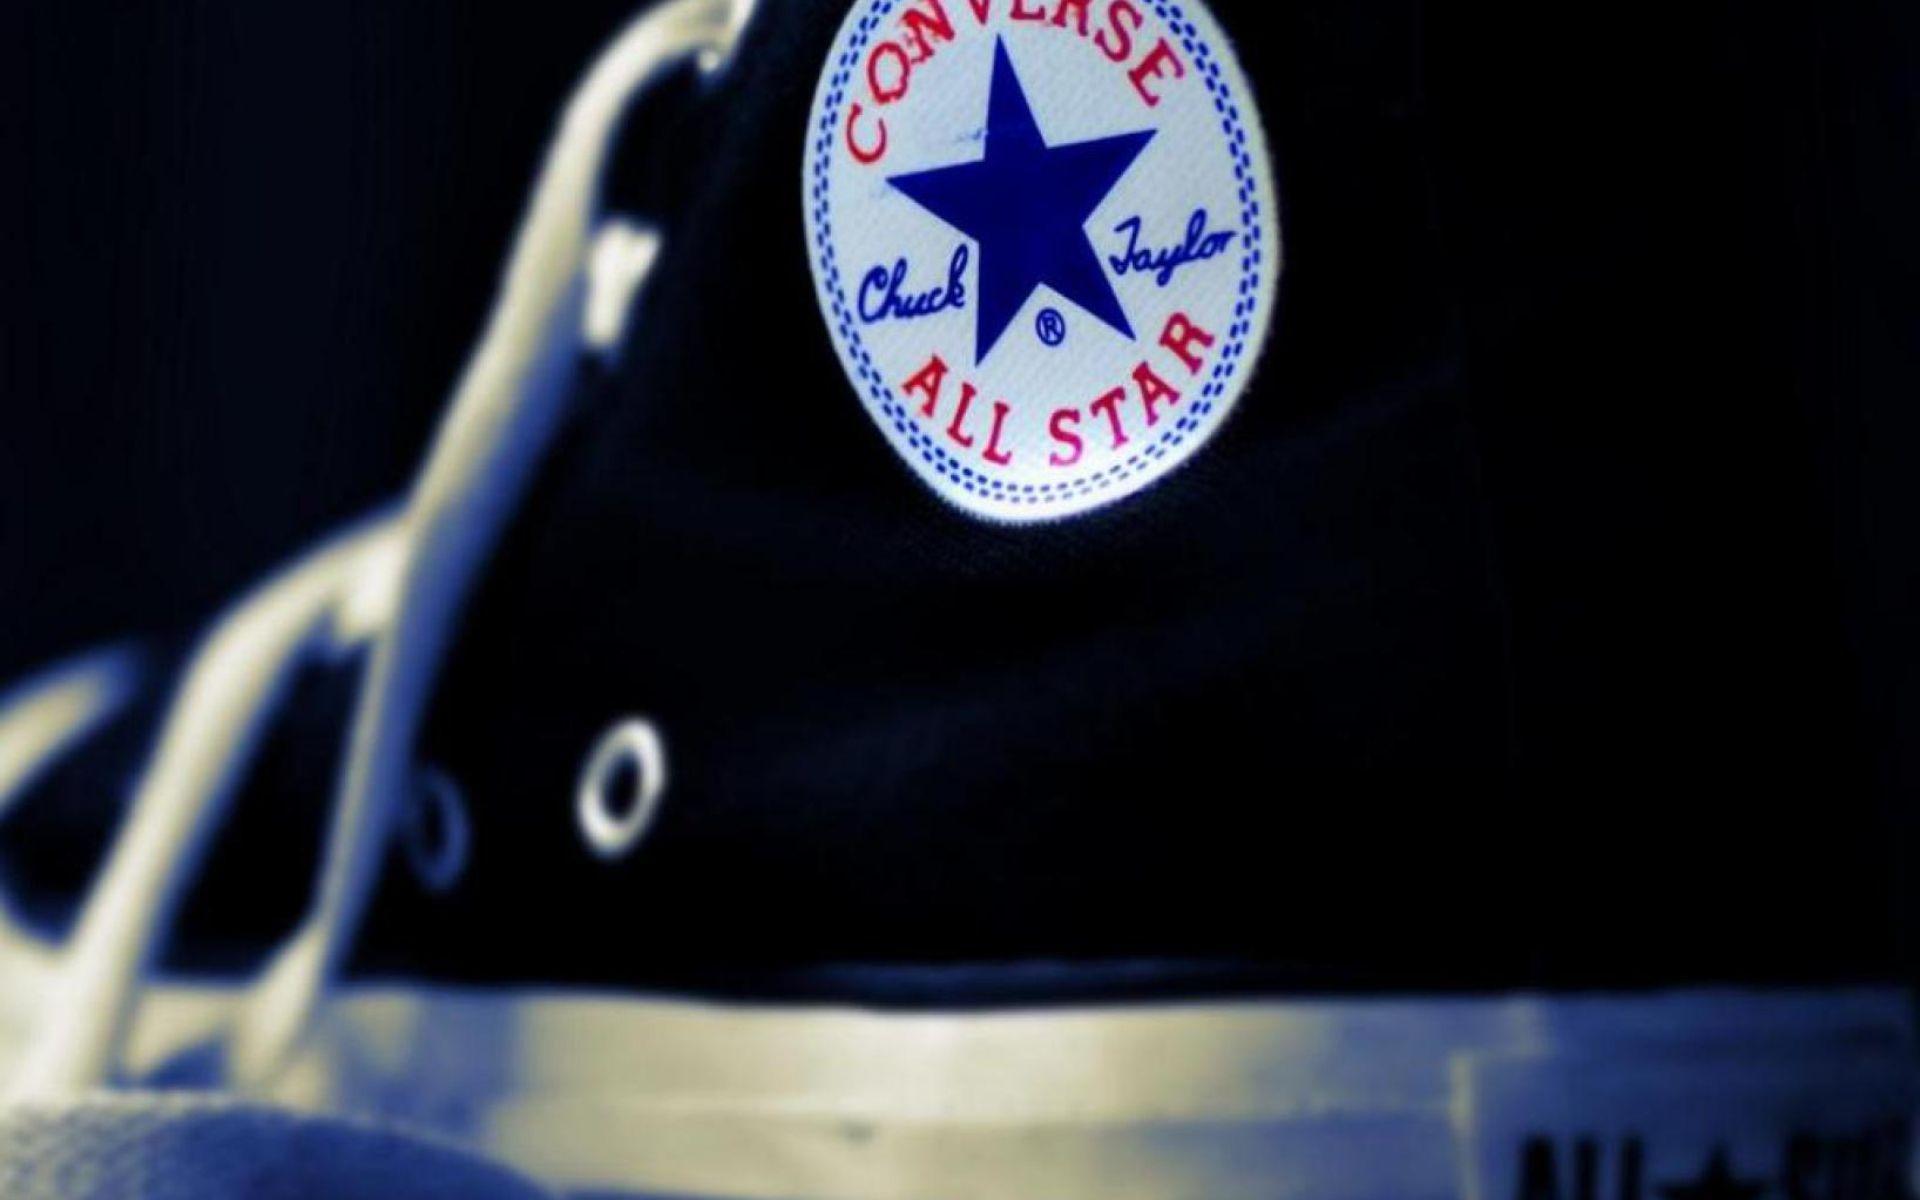 Converse image All Star HD wallpaper and background photo 900×675